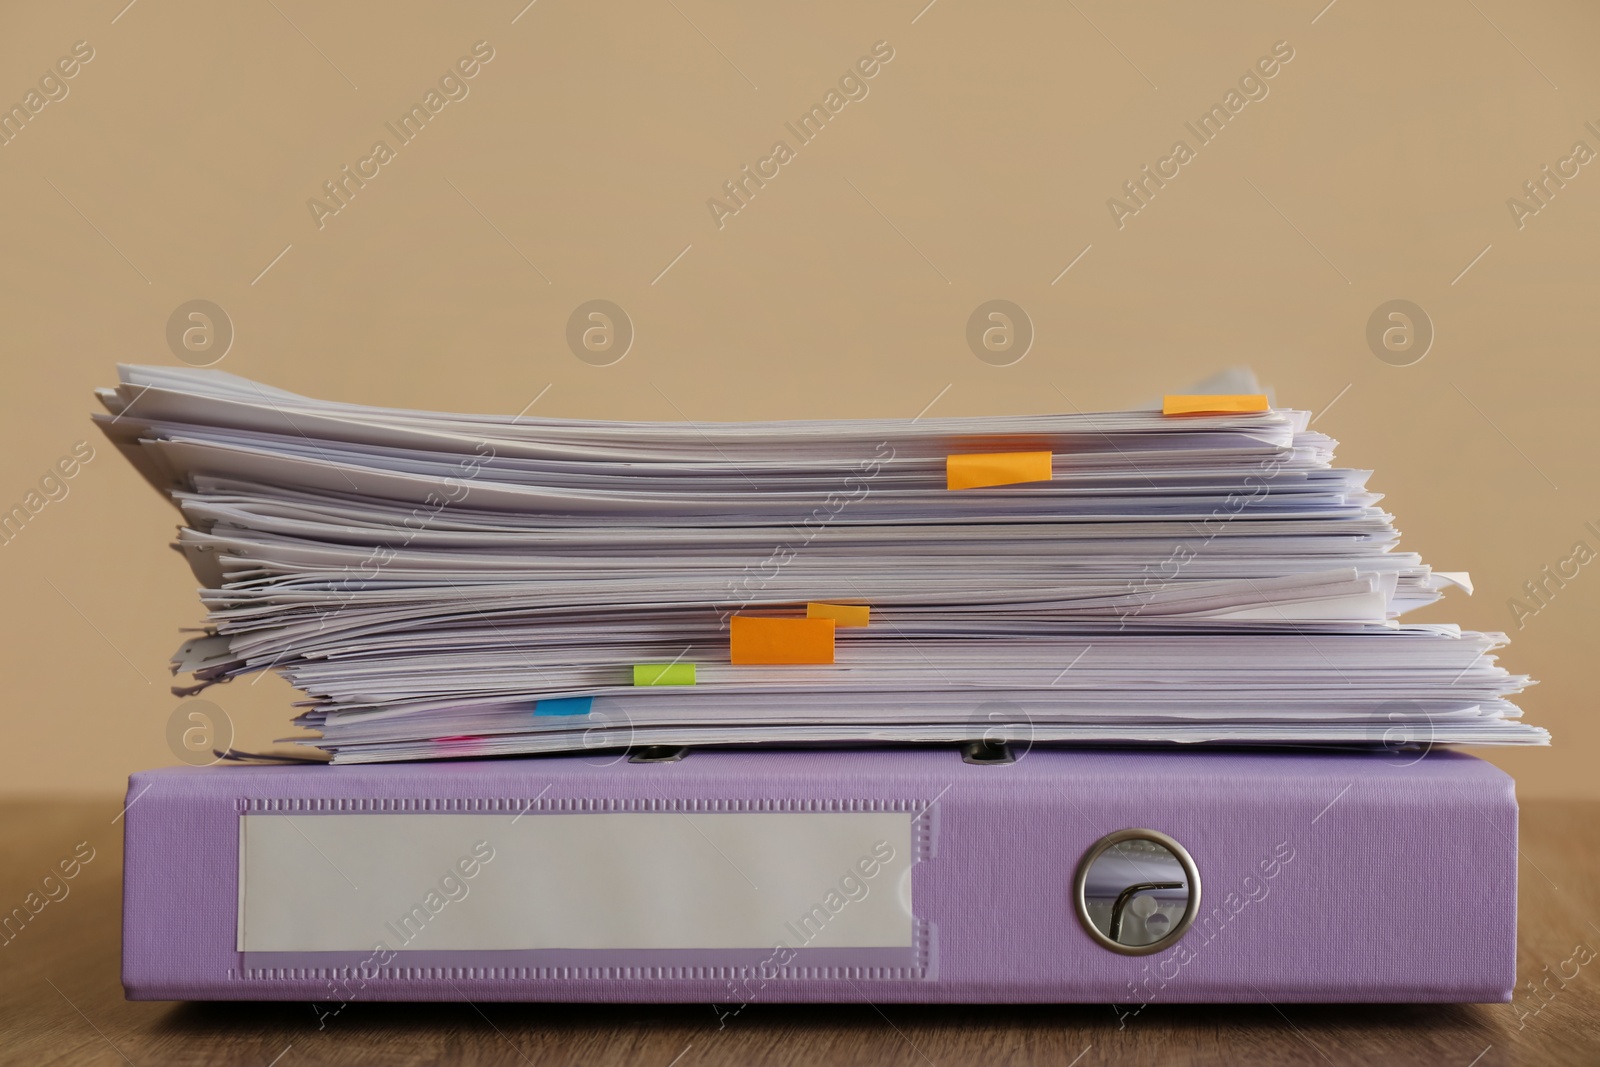 Photo of Stack of documents and office folder on wooden table against brown background